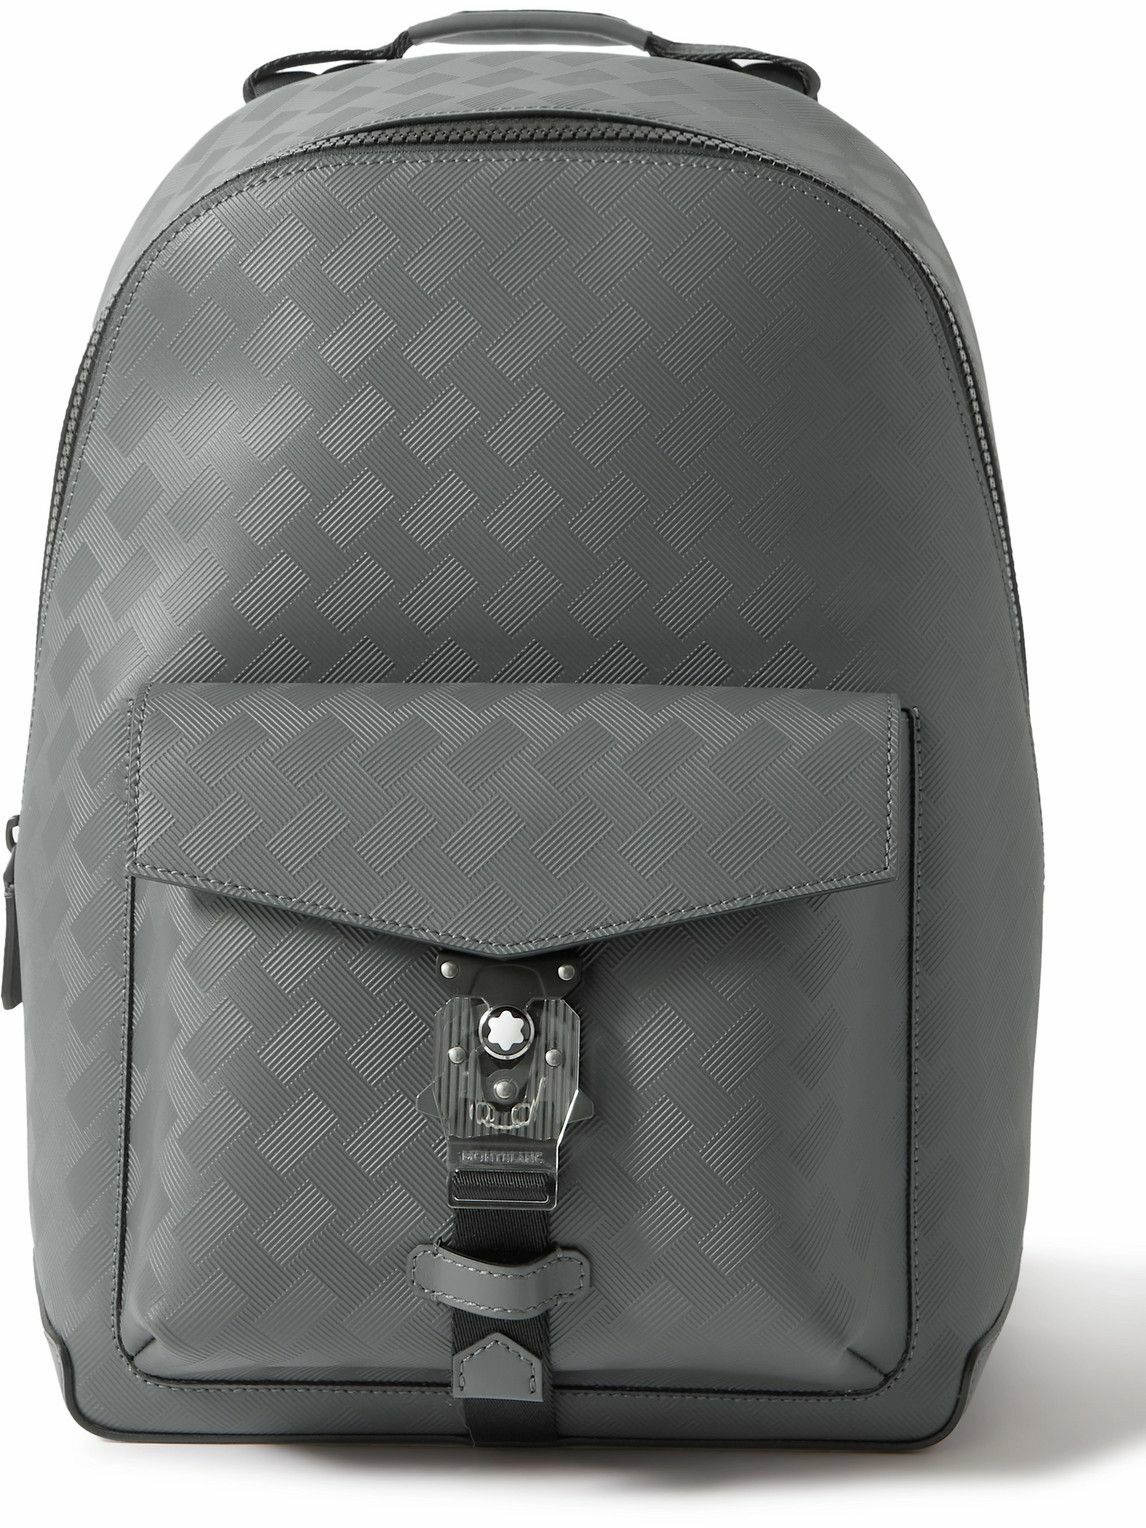 MONTBLANC Extreme 3.0 Cross-Grain Leather Backpack for Men